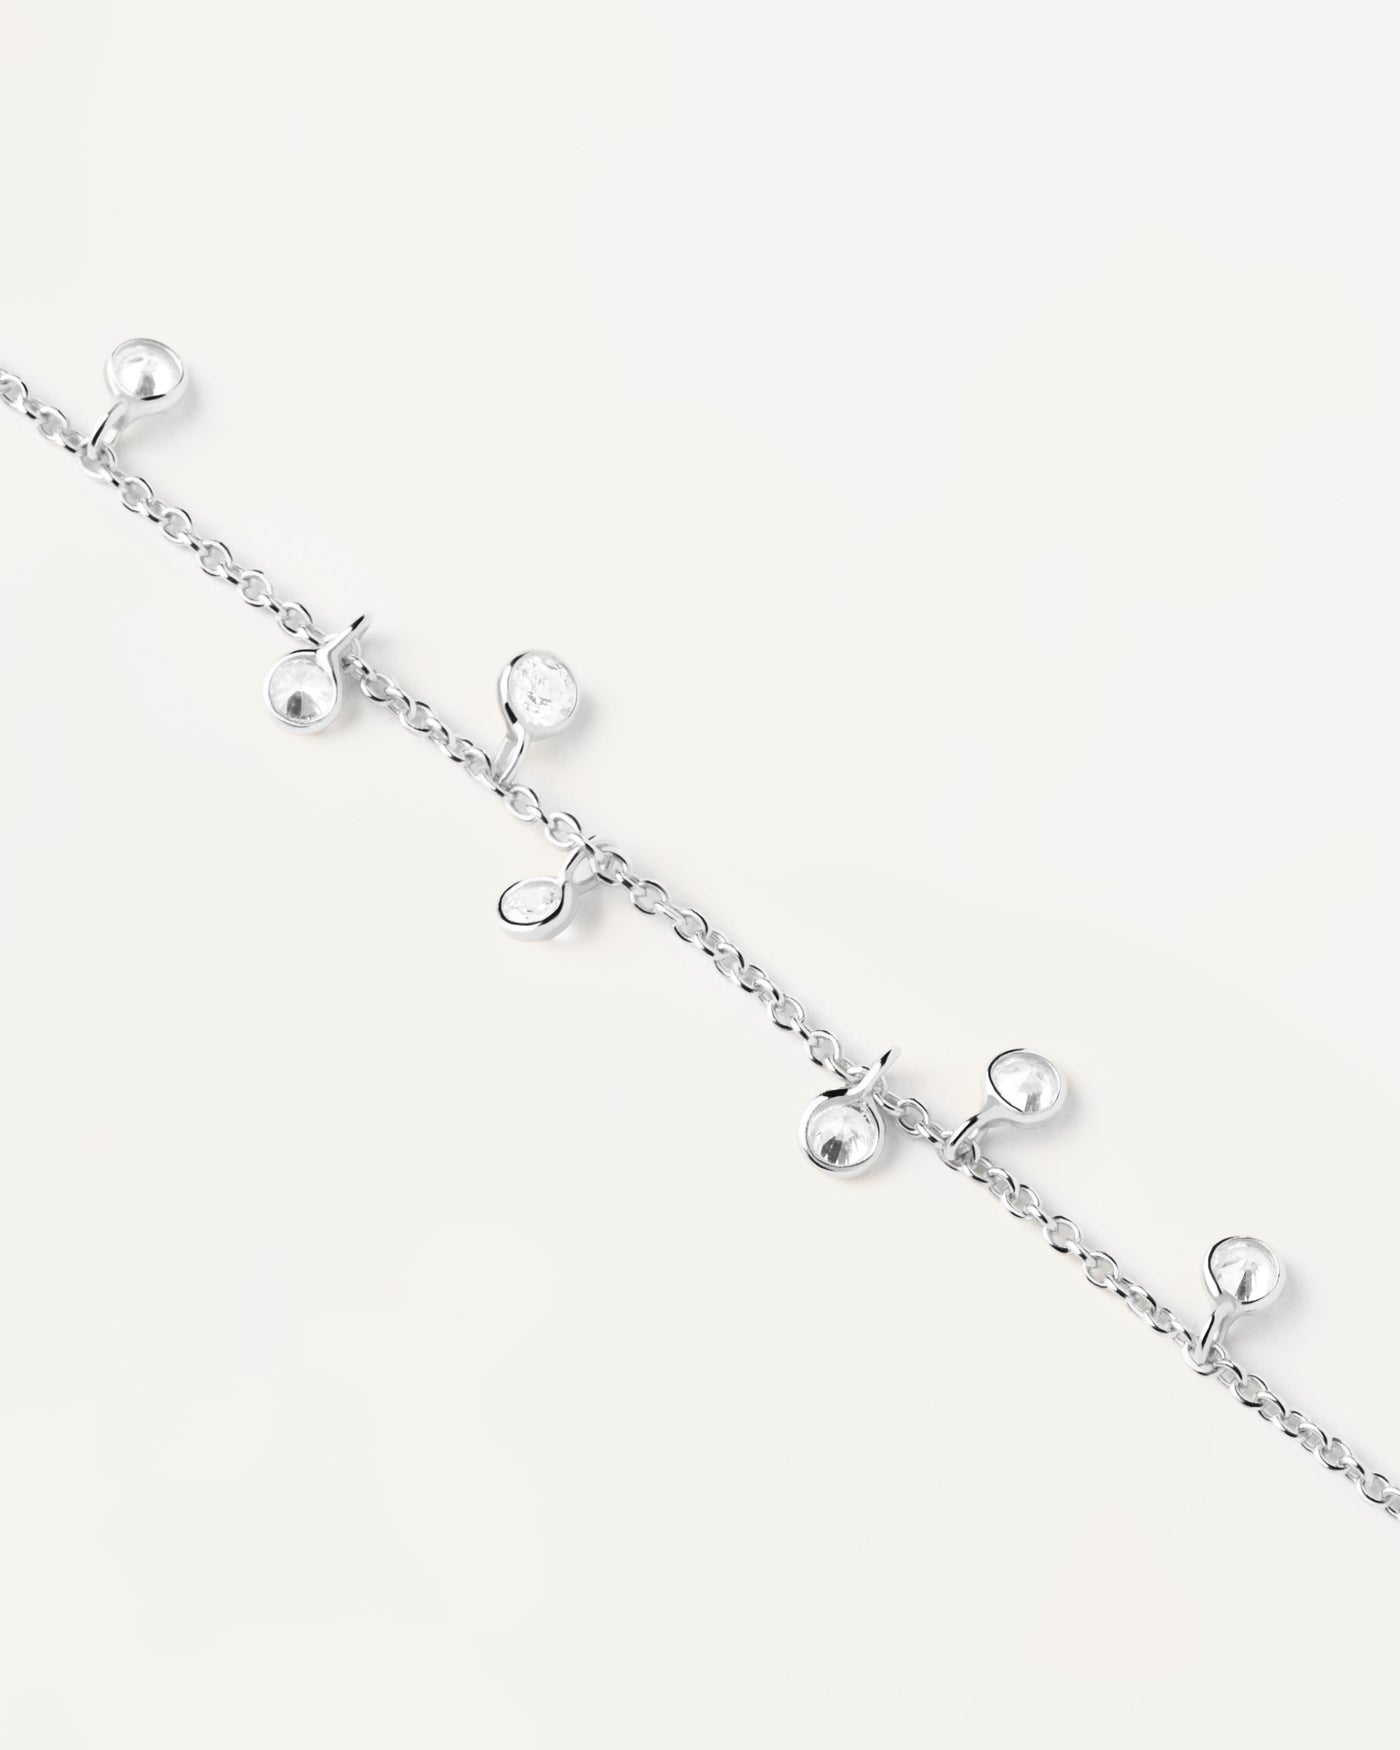 2023 Selection | Bliss Silver Bracelet. Bright bracelet with zirconia pendants set in gold circles of sterling silver. Get the latest arrival from PDPAOLA. Place your order safely and get this Best Seller. Free Shipping.